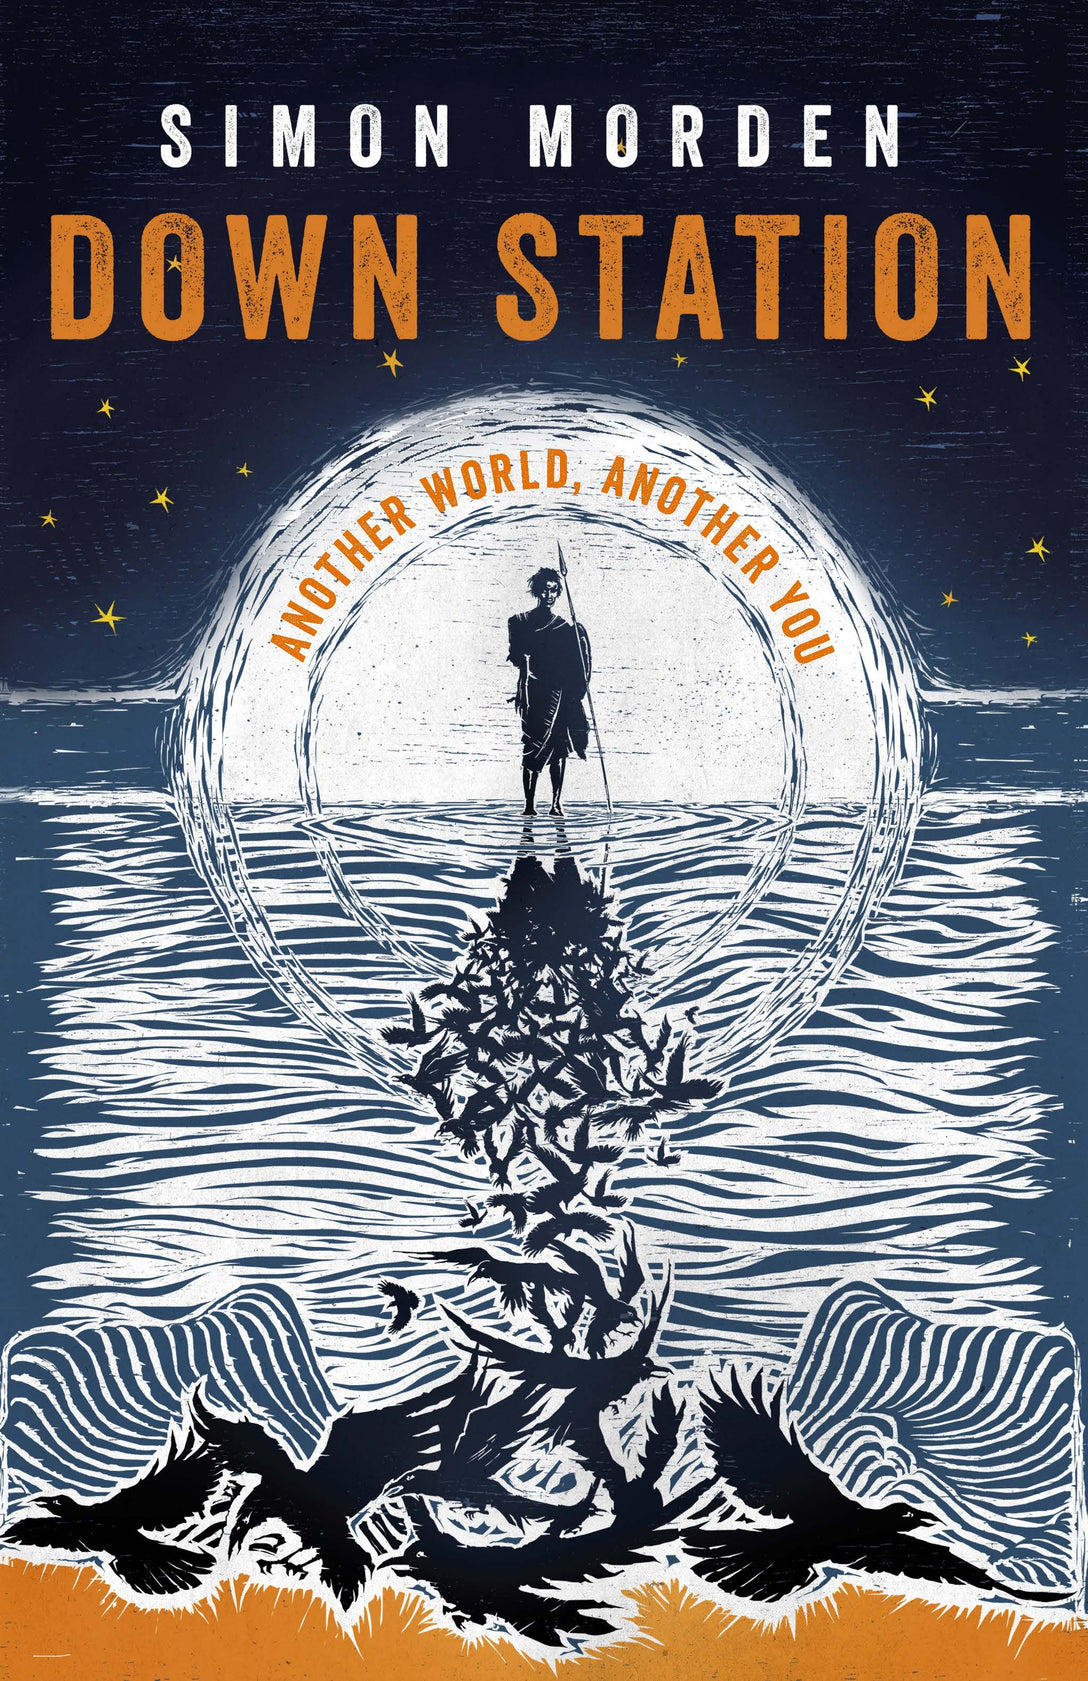 Down Station by Simon Morden